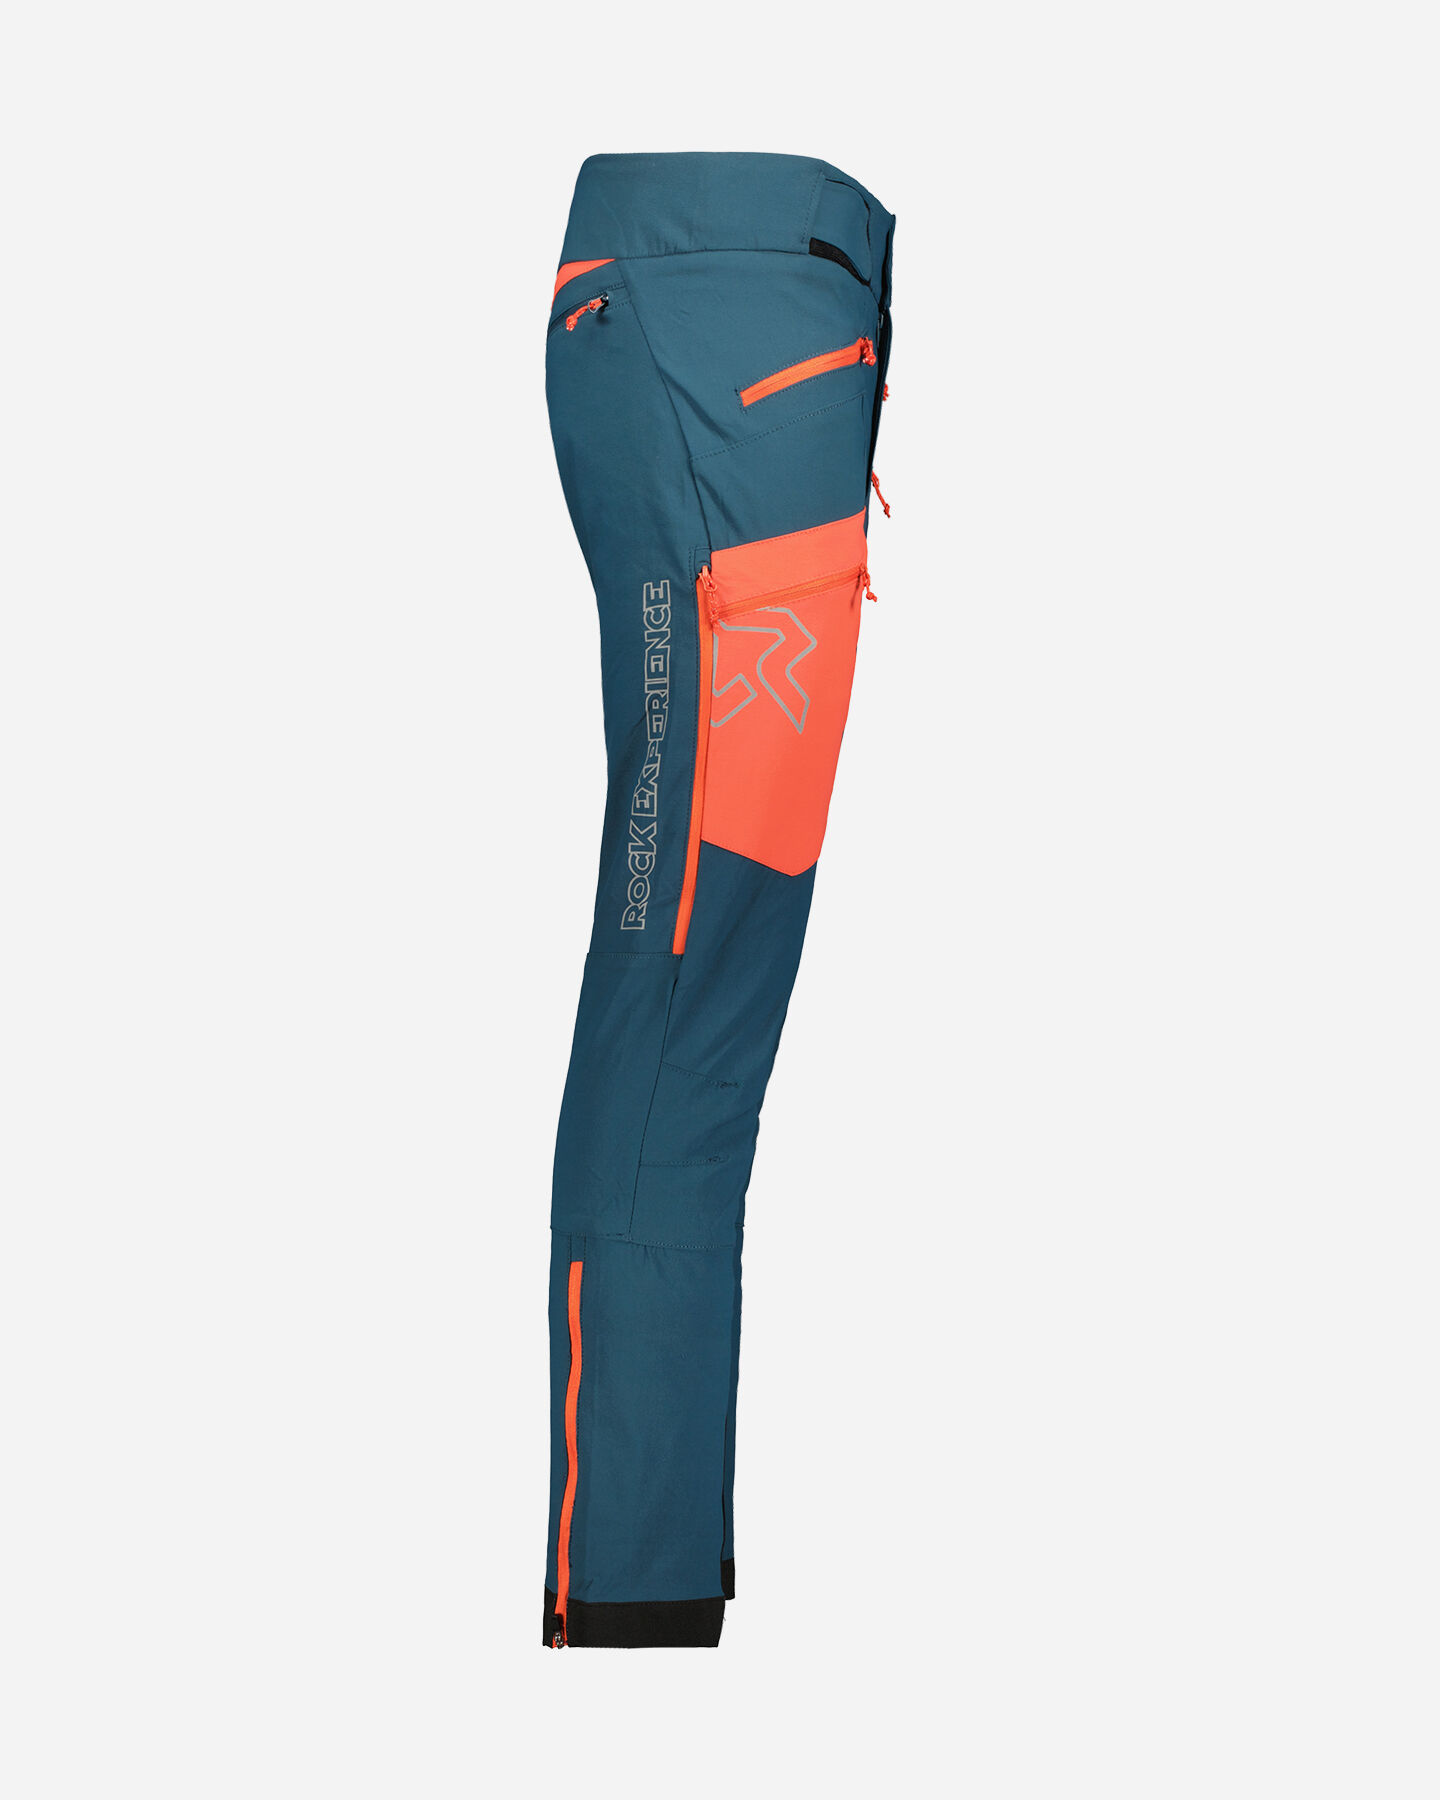  Pantalone outdoor ROCK EXPERIENCE TOWER M S4115482|C786|M scatto 1